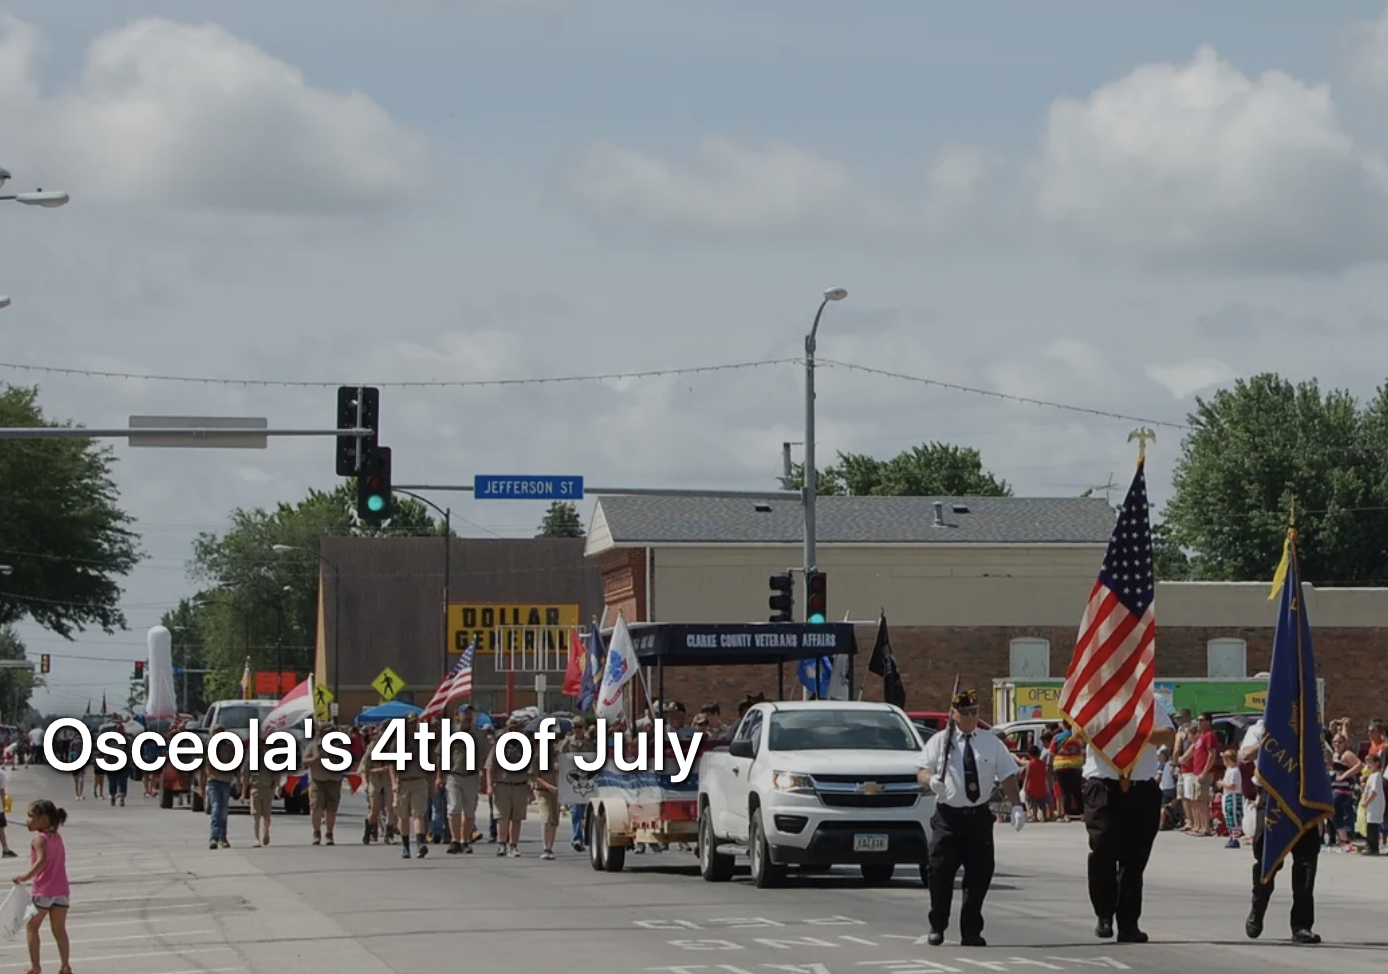 Street view of parade with color guard, truck, and people